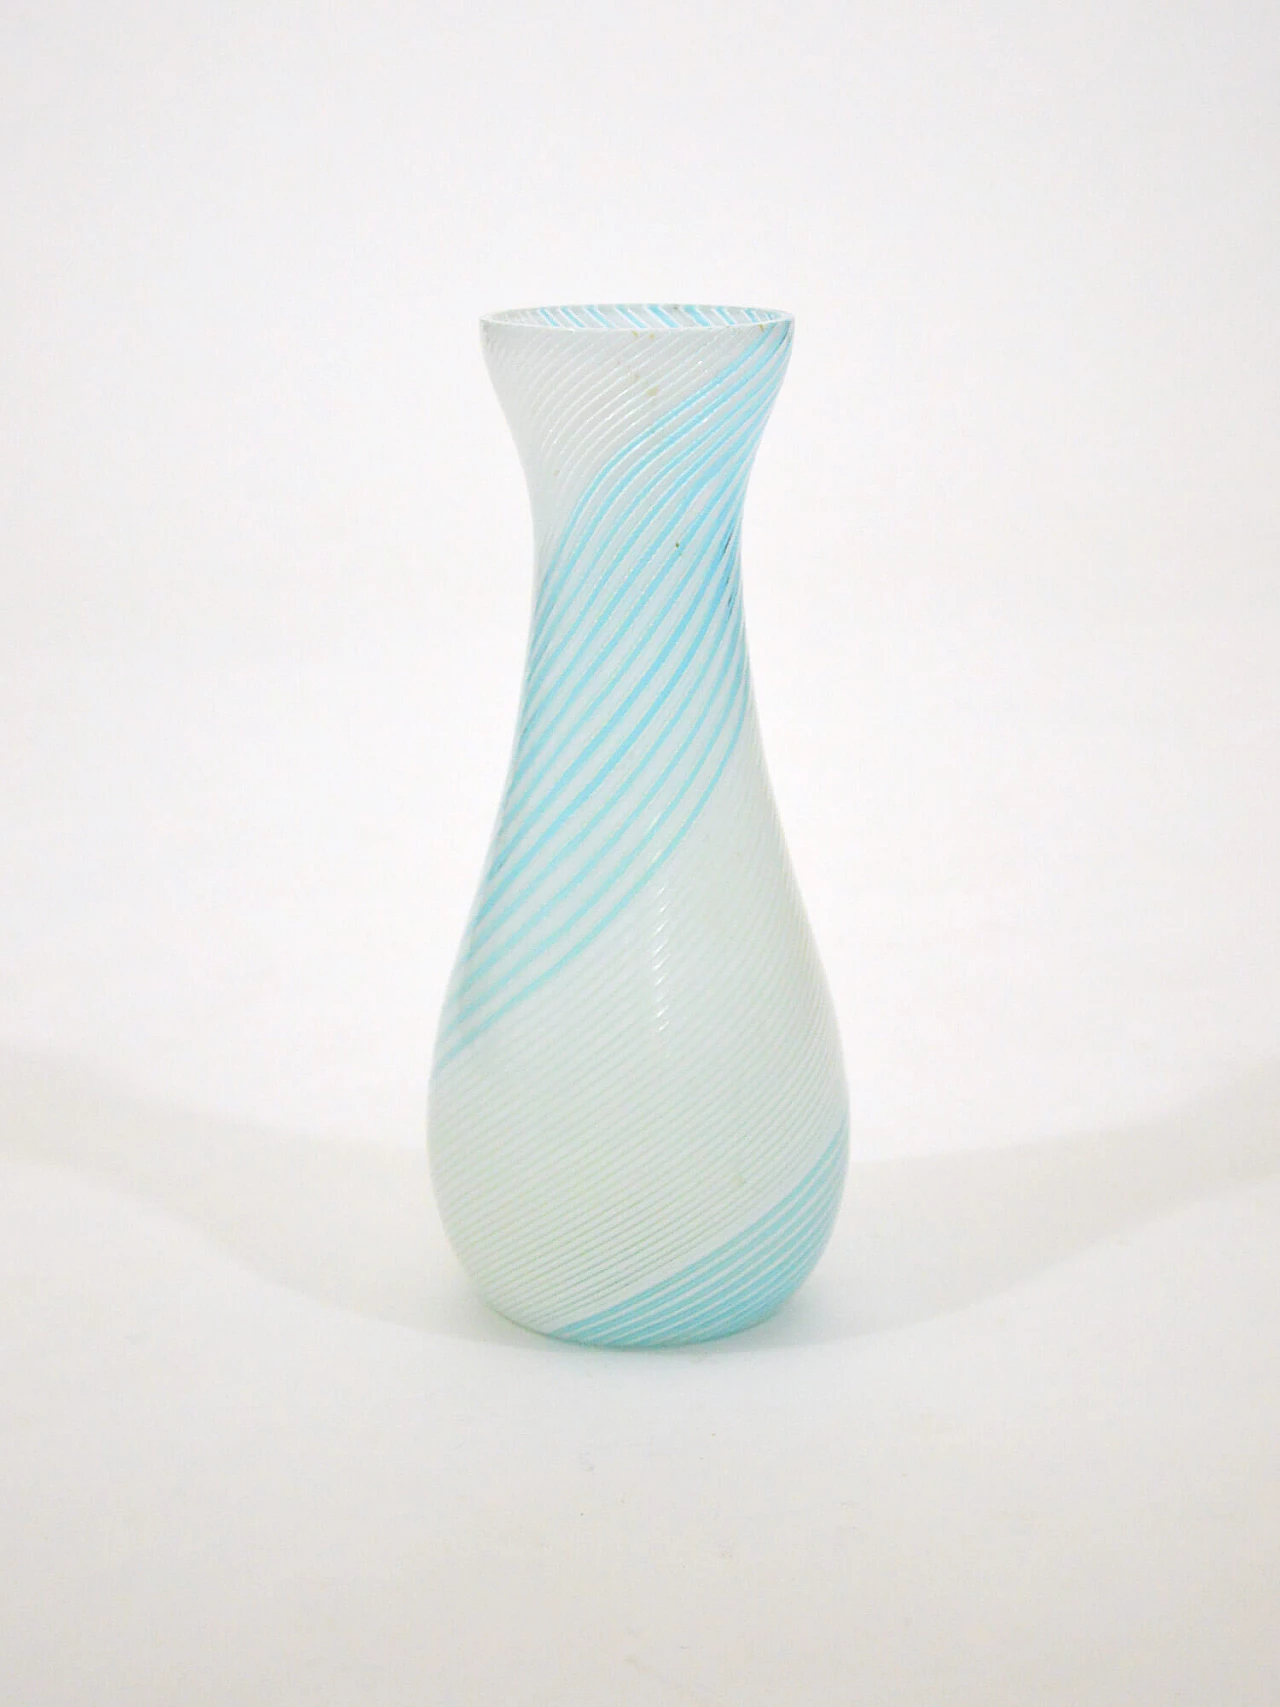 Murano glass vase by Dino Martens for Aureliano Toso, 1950s 2